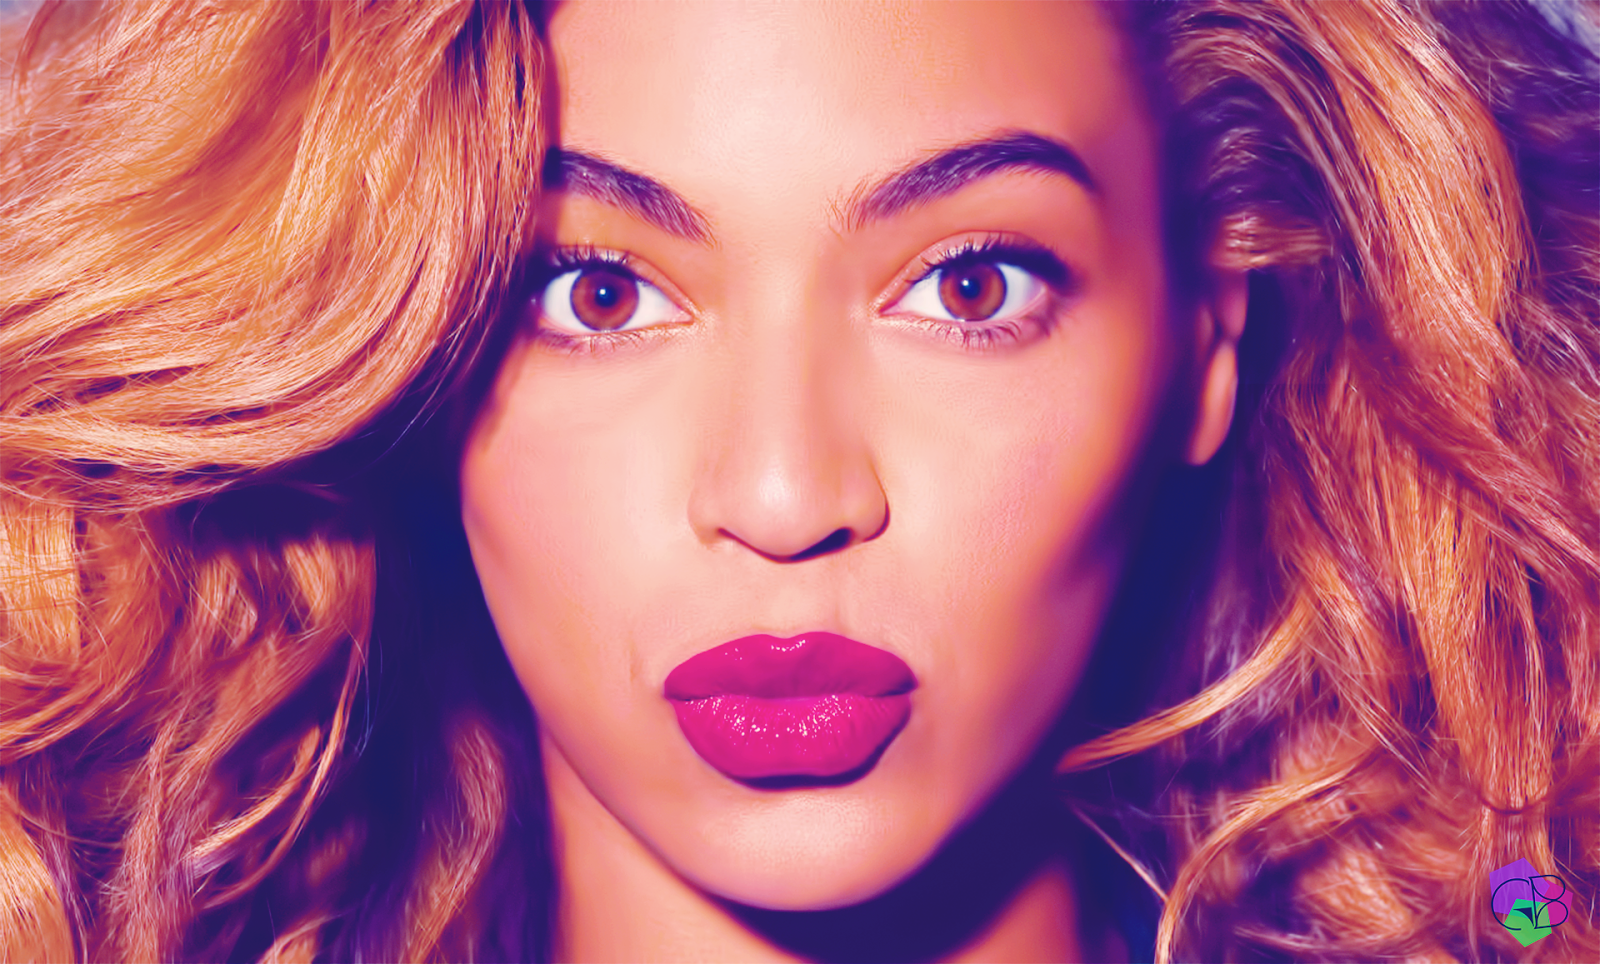 Beyonce Wallpaper In High Quality Desktop Background